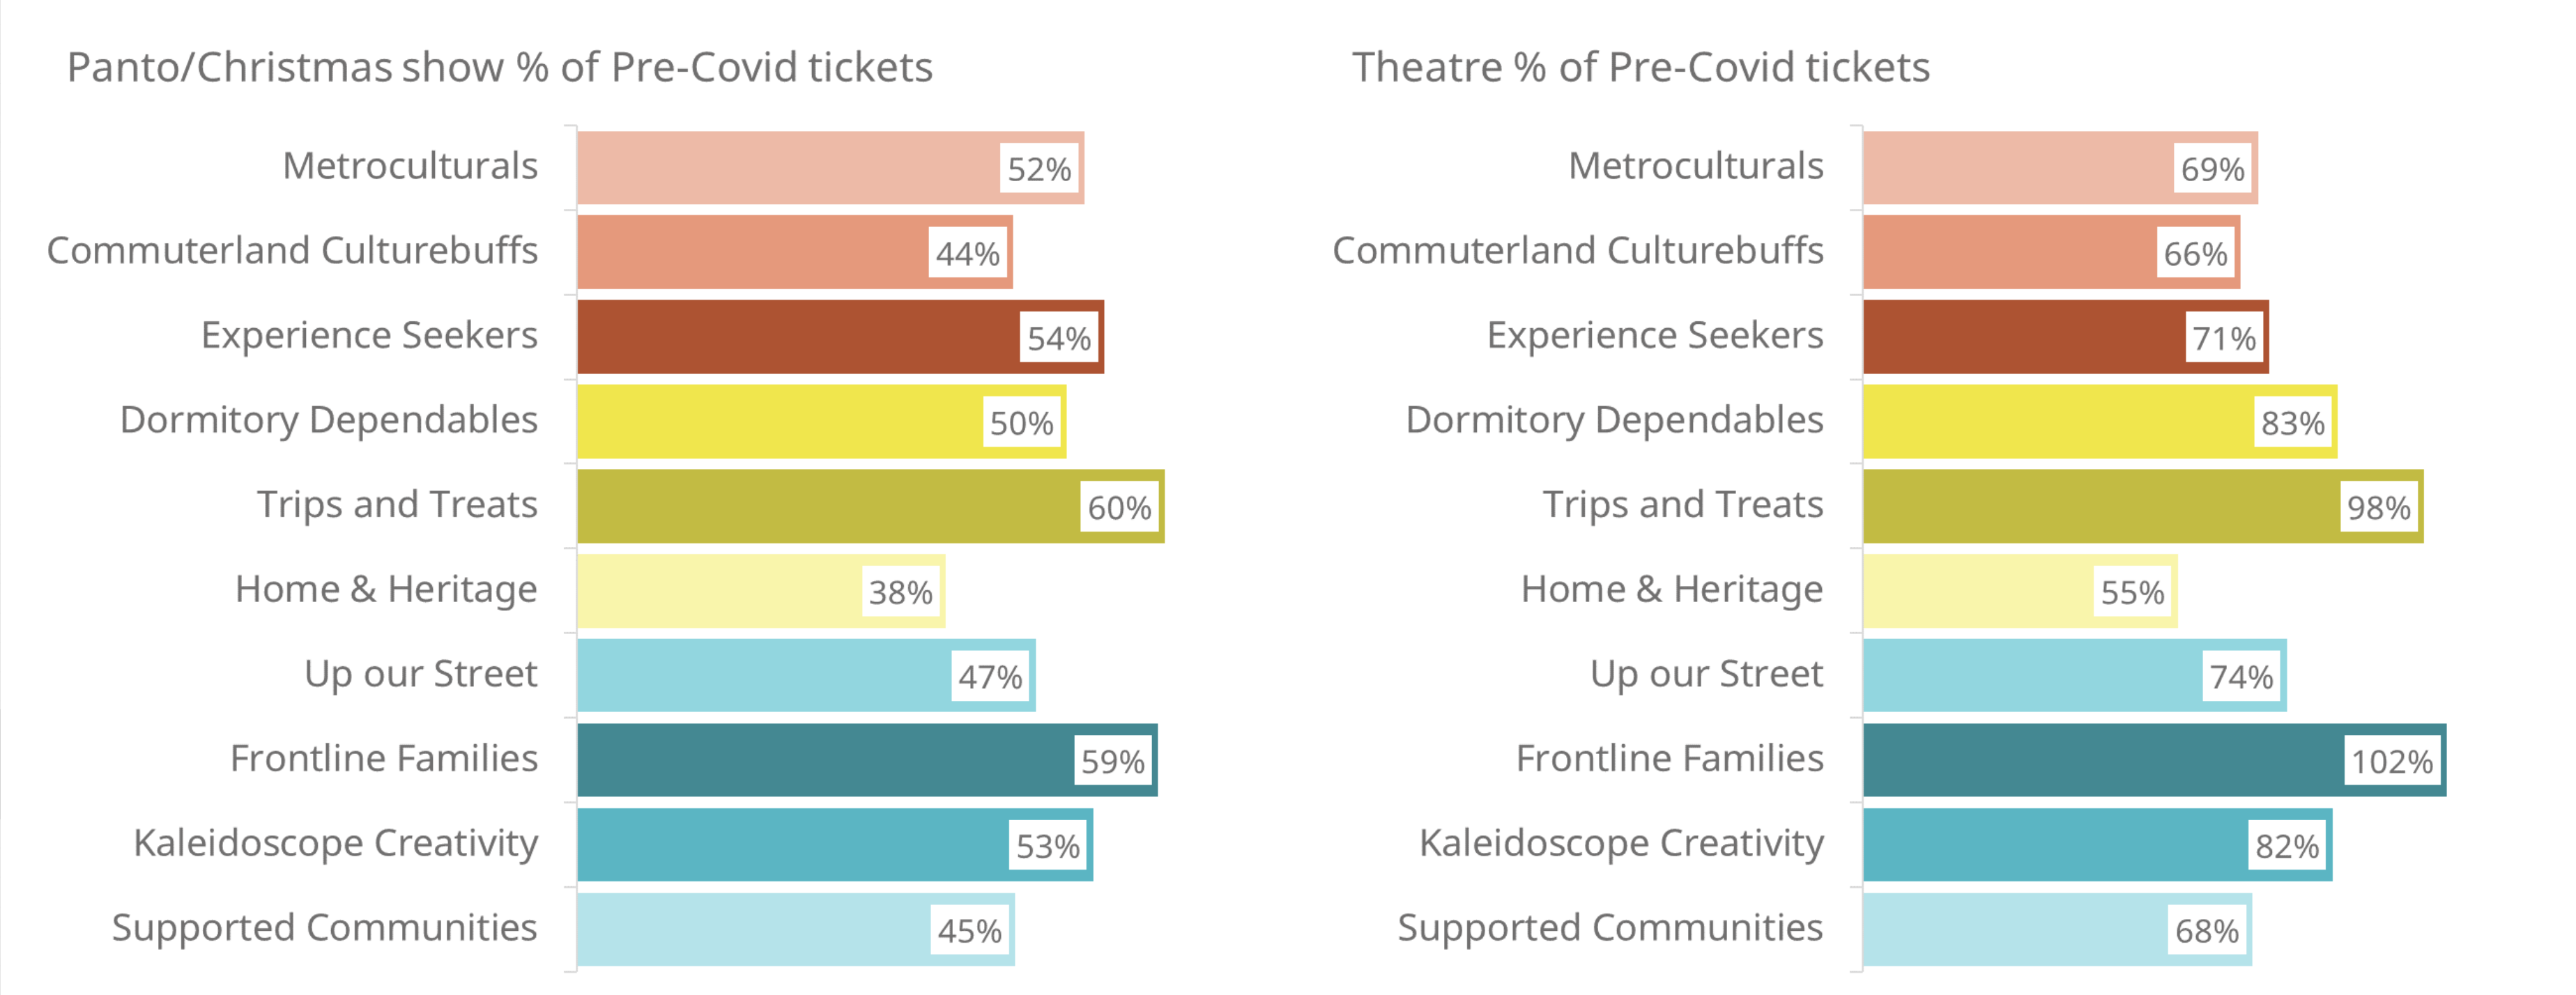 Panto/Christmas Shows Ticket compared to Theatre Ticket % of Pre-Covid Sales